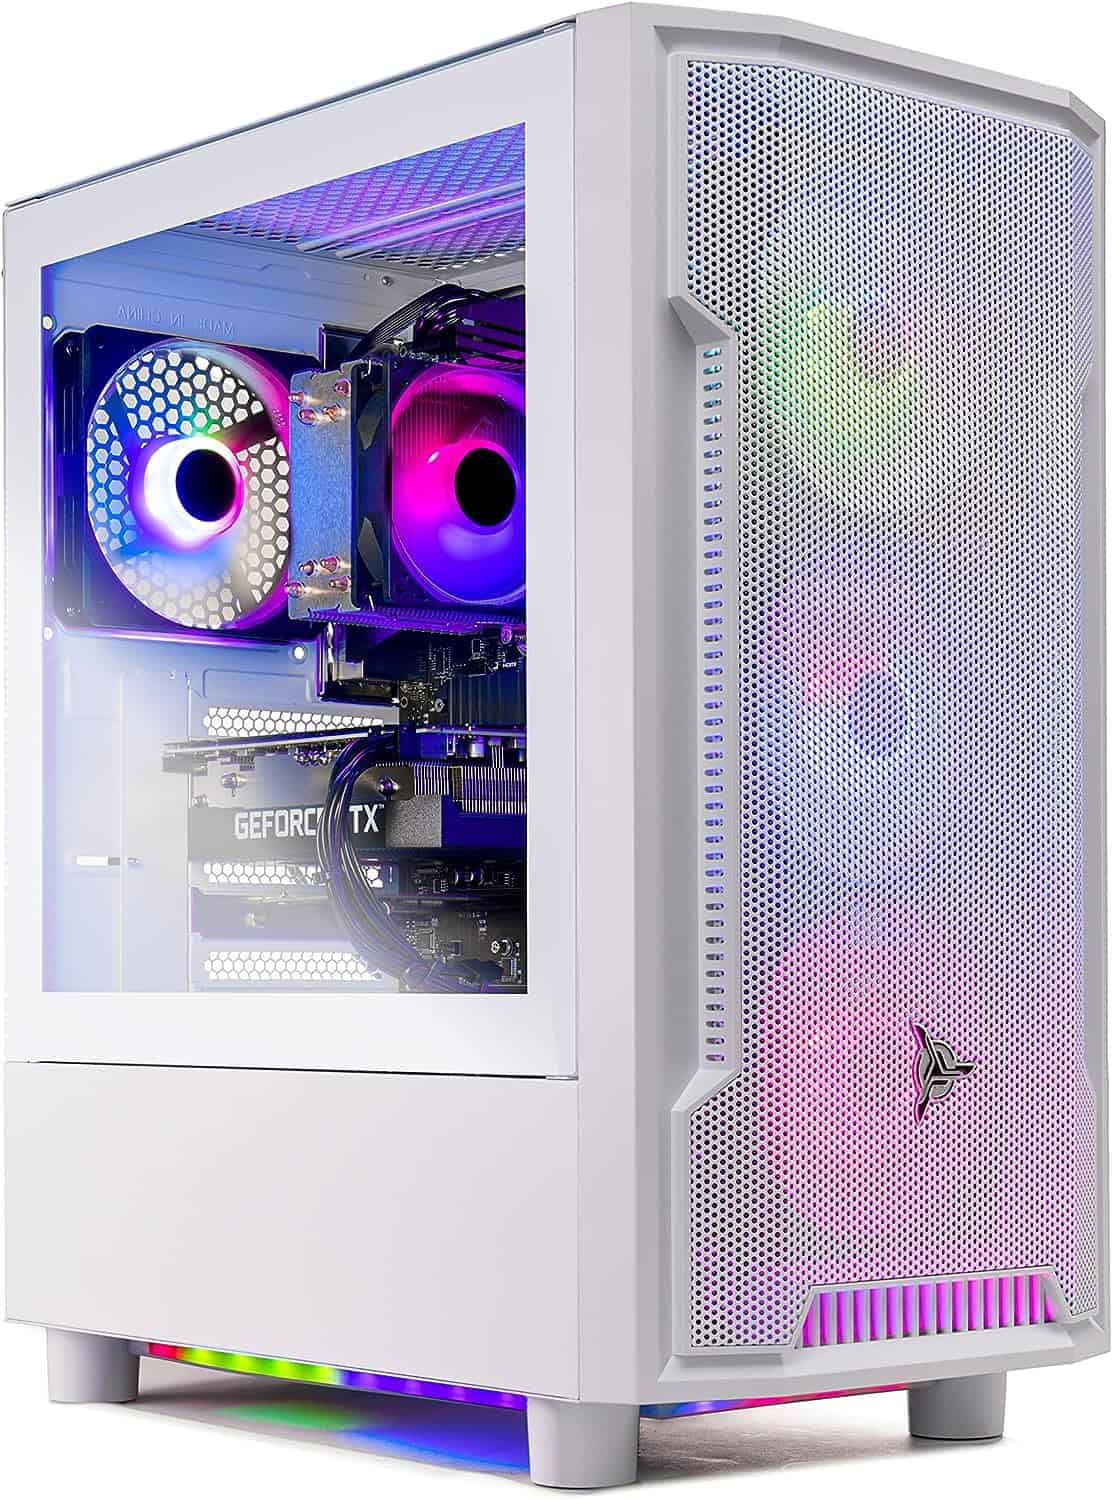 Skytech Archangel Gaming PC Desktop with colorful lights.